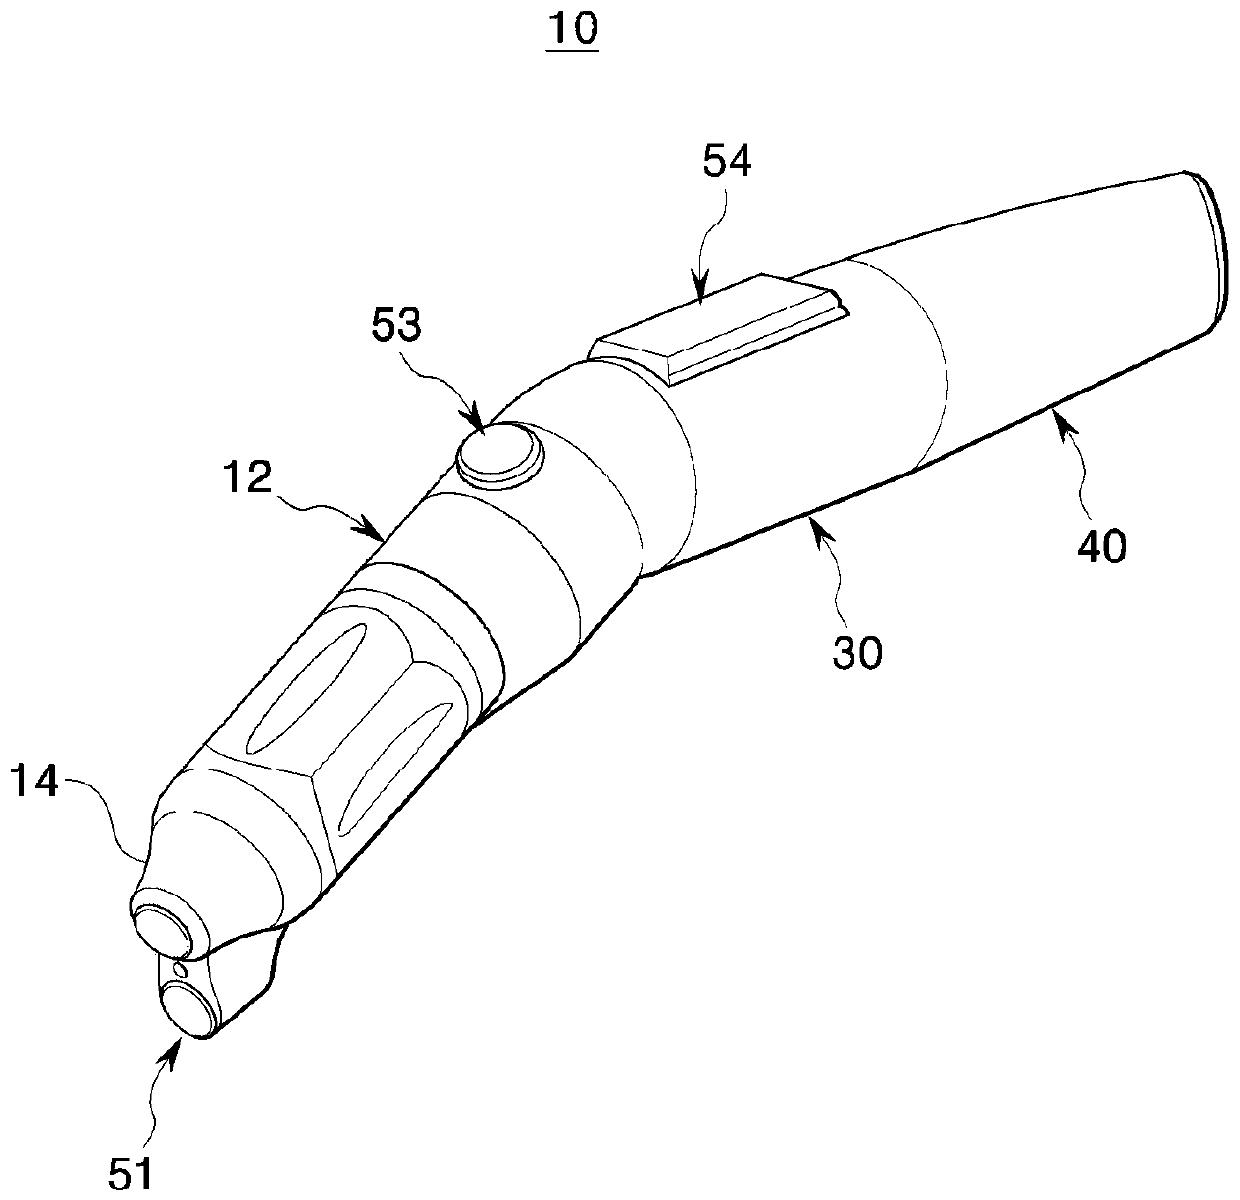 Local cryoanesthesia device, method of controlling local cryoanesthesia device, and cooling temperature regulator of local cryoanesthesia device